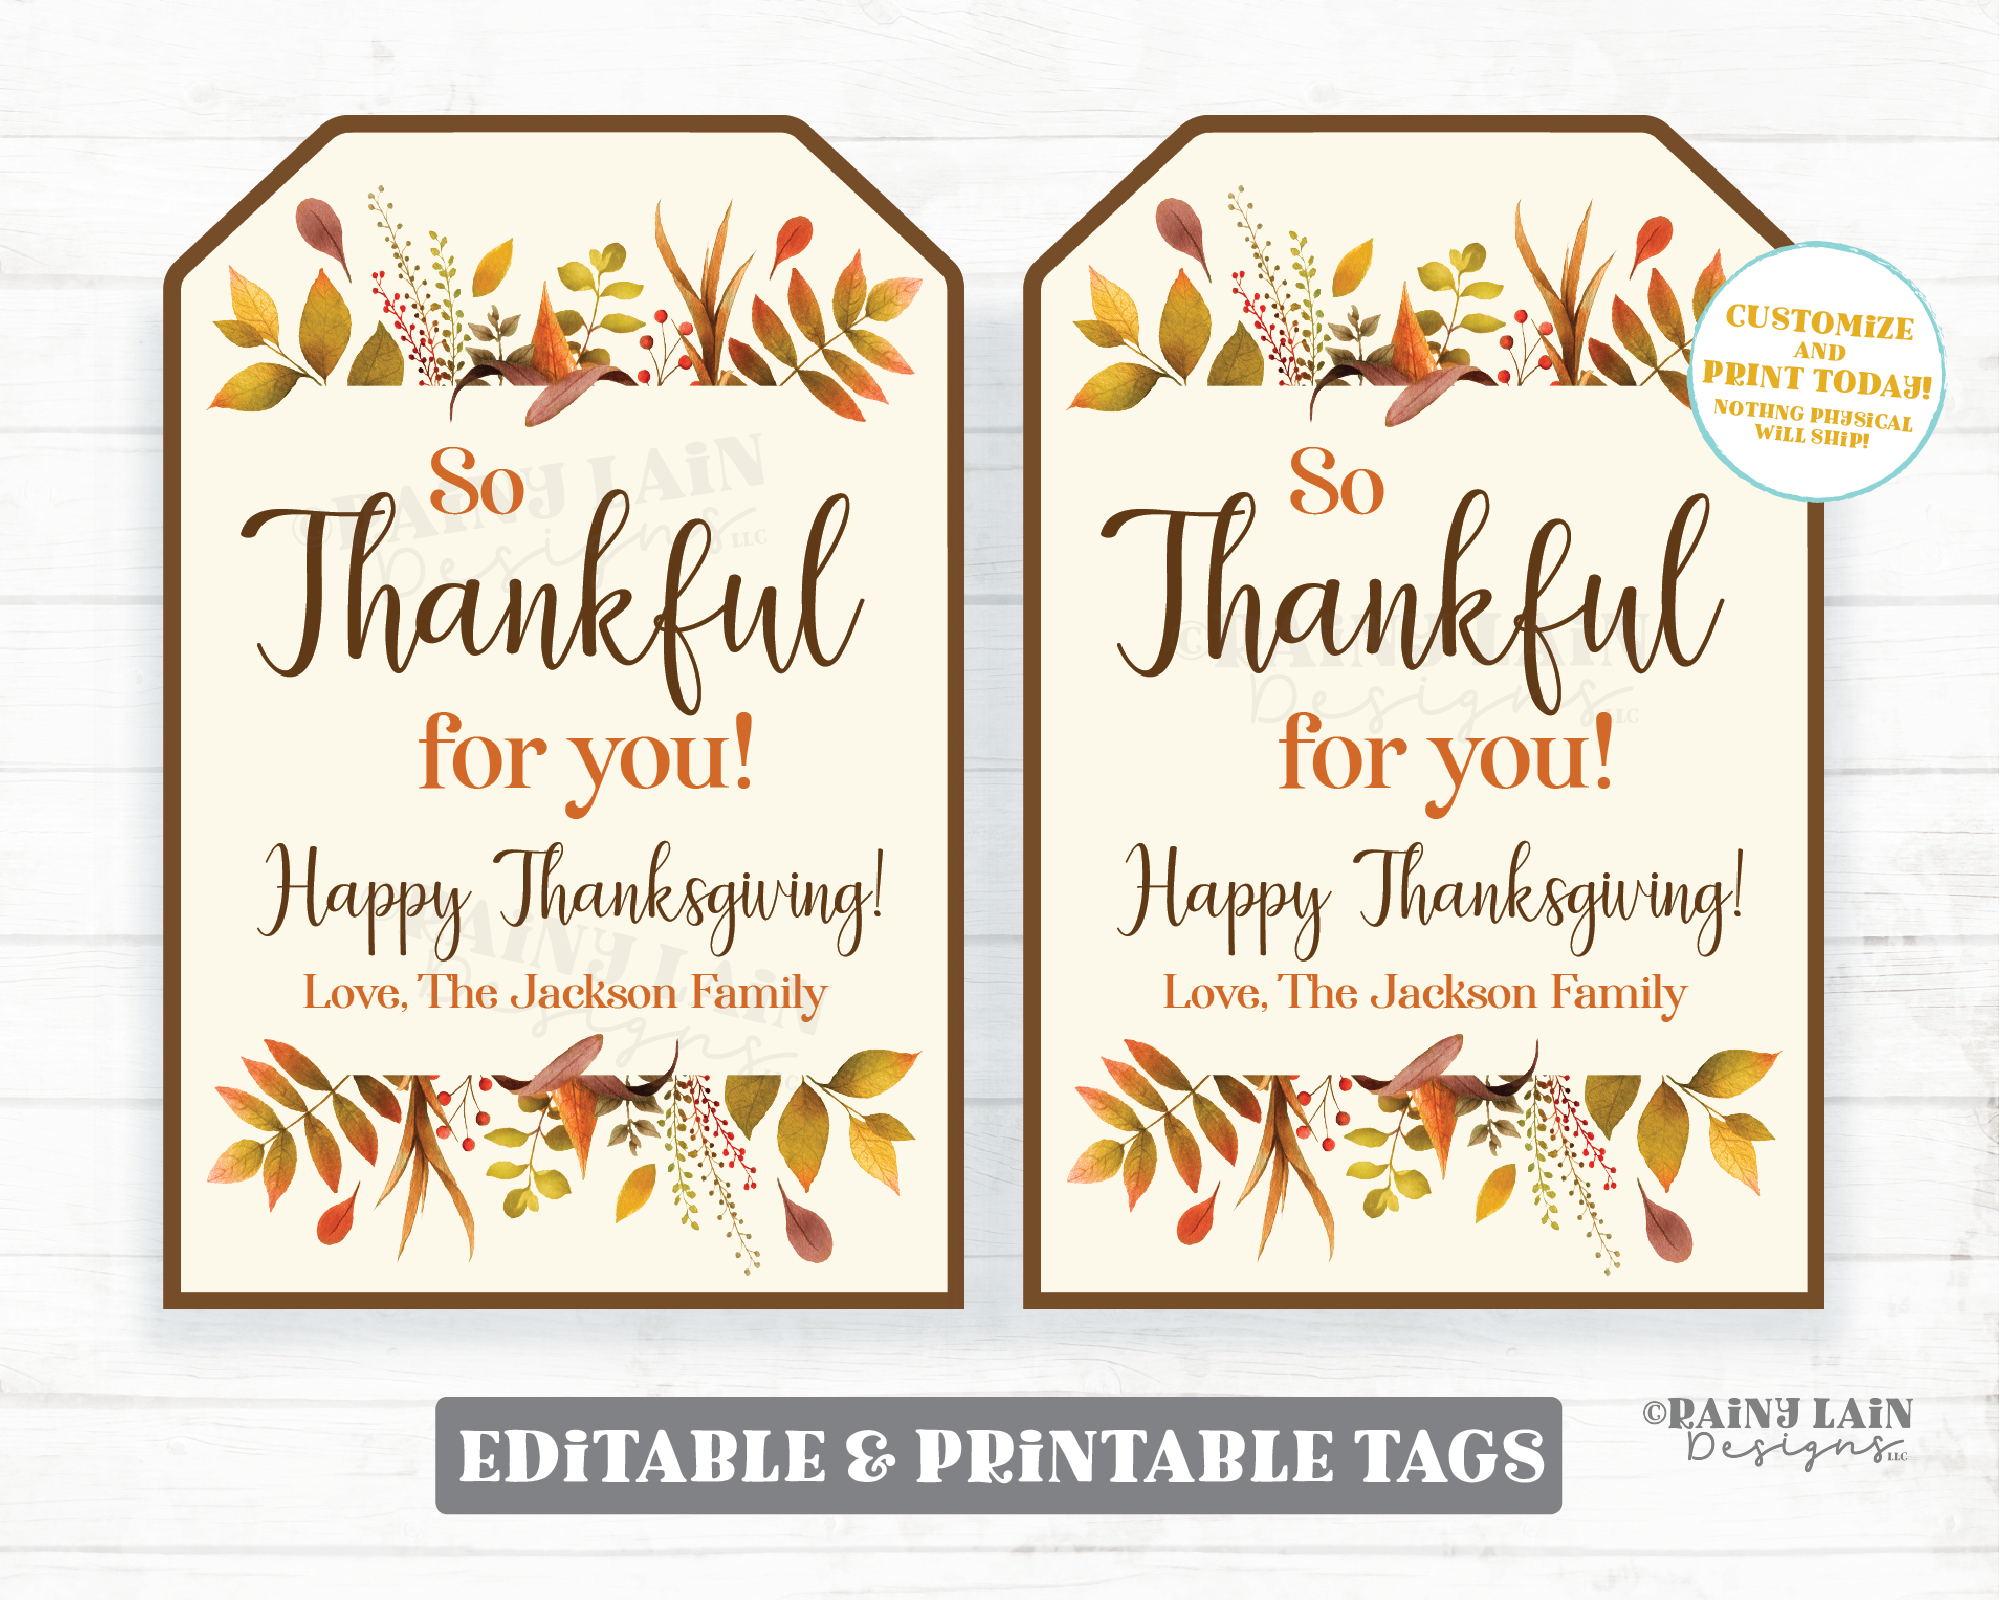 So Thankful for You Editable Thanksgiving Tags Custom Personalized Thanksgiving Favor Gift Co-worker Staff appreciation Floral Fall Leaves